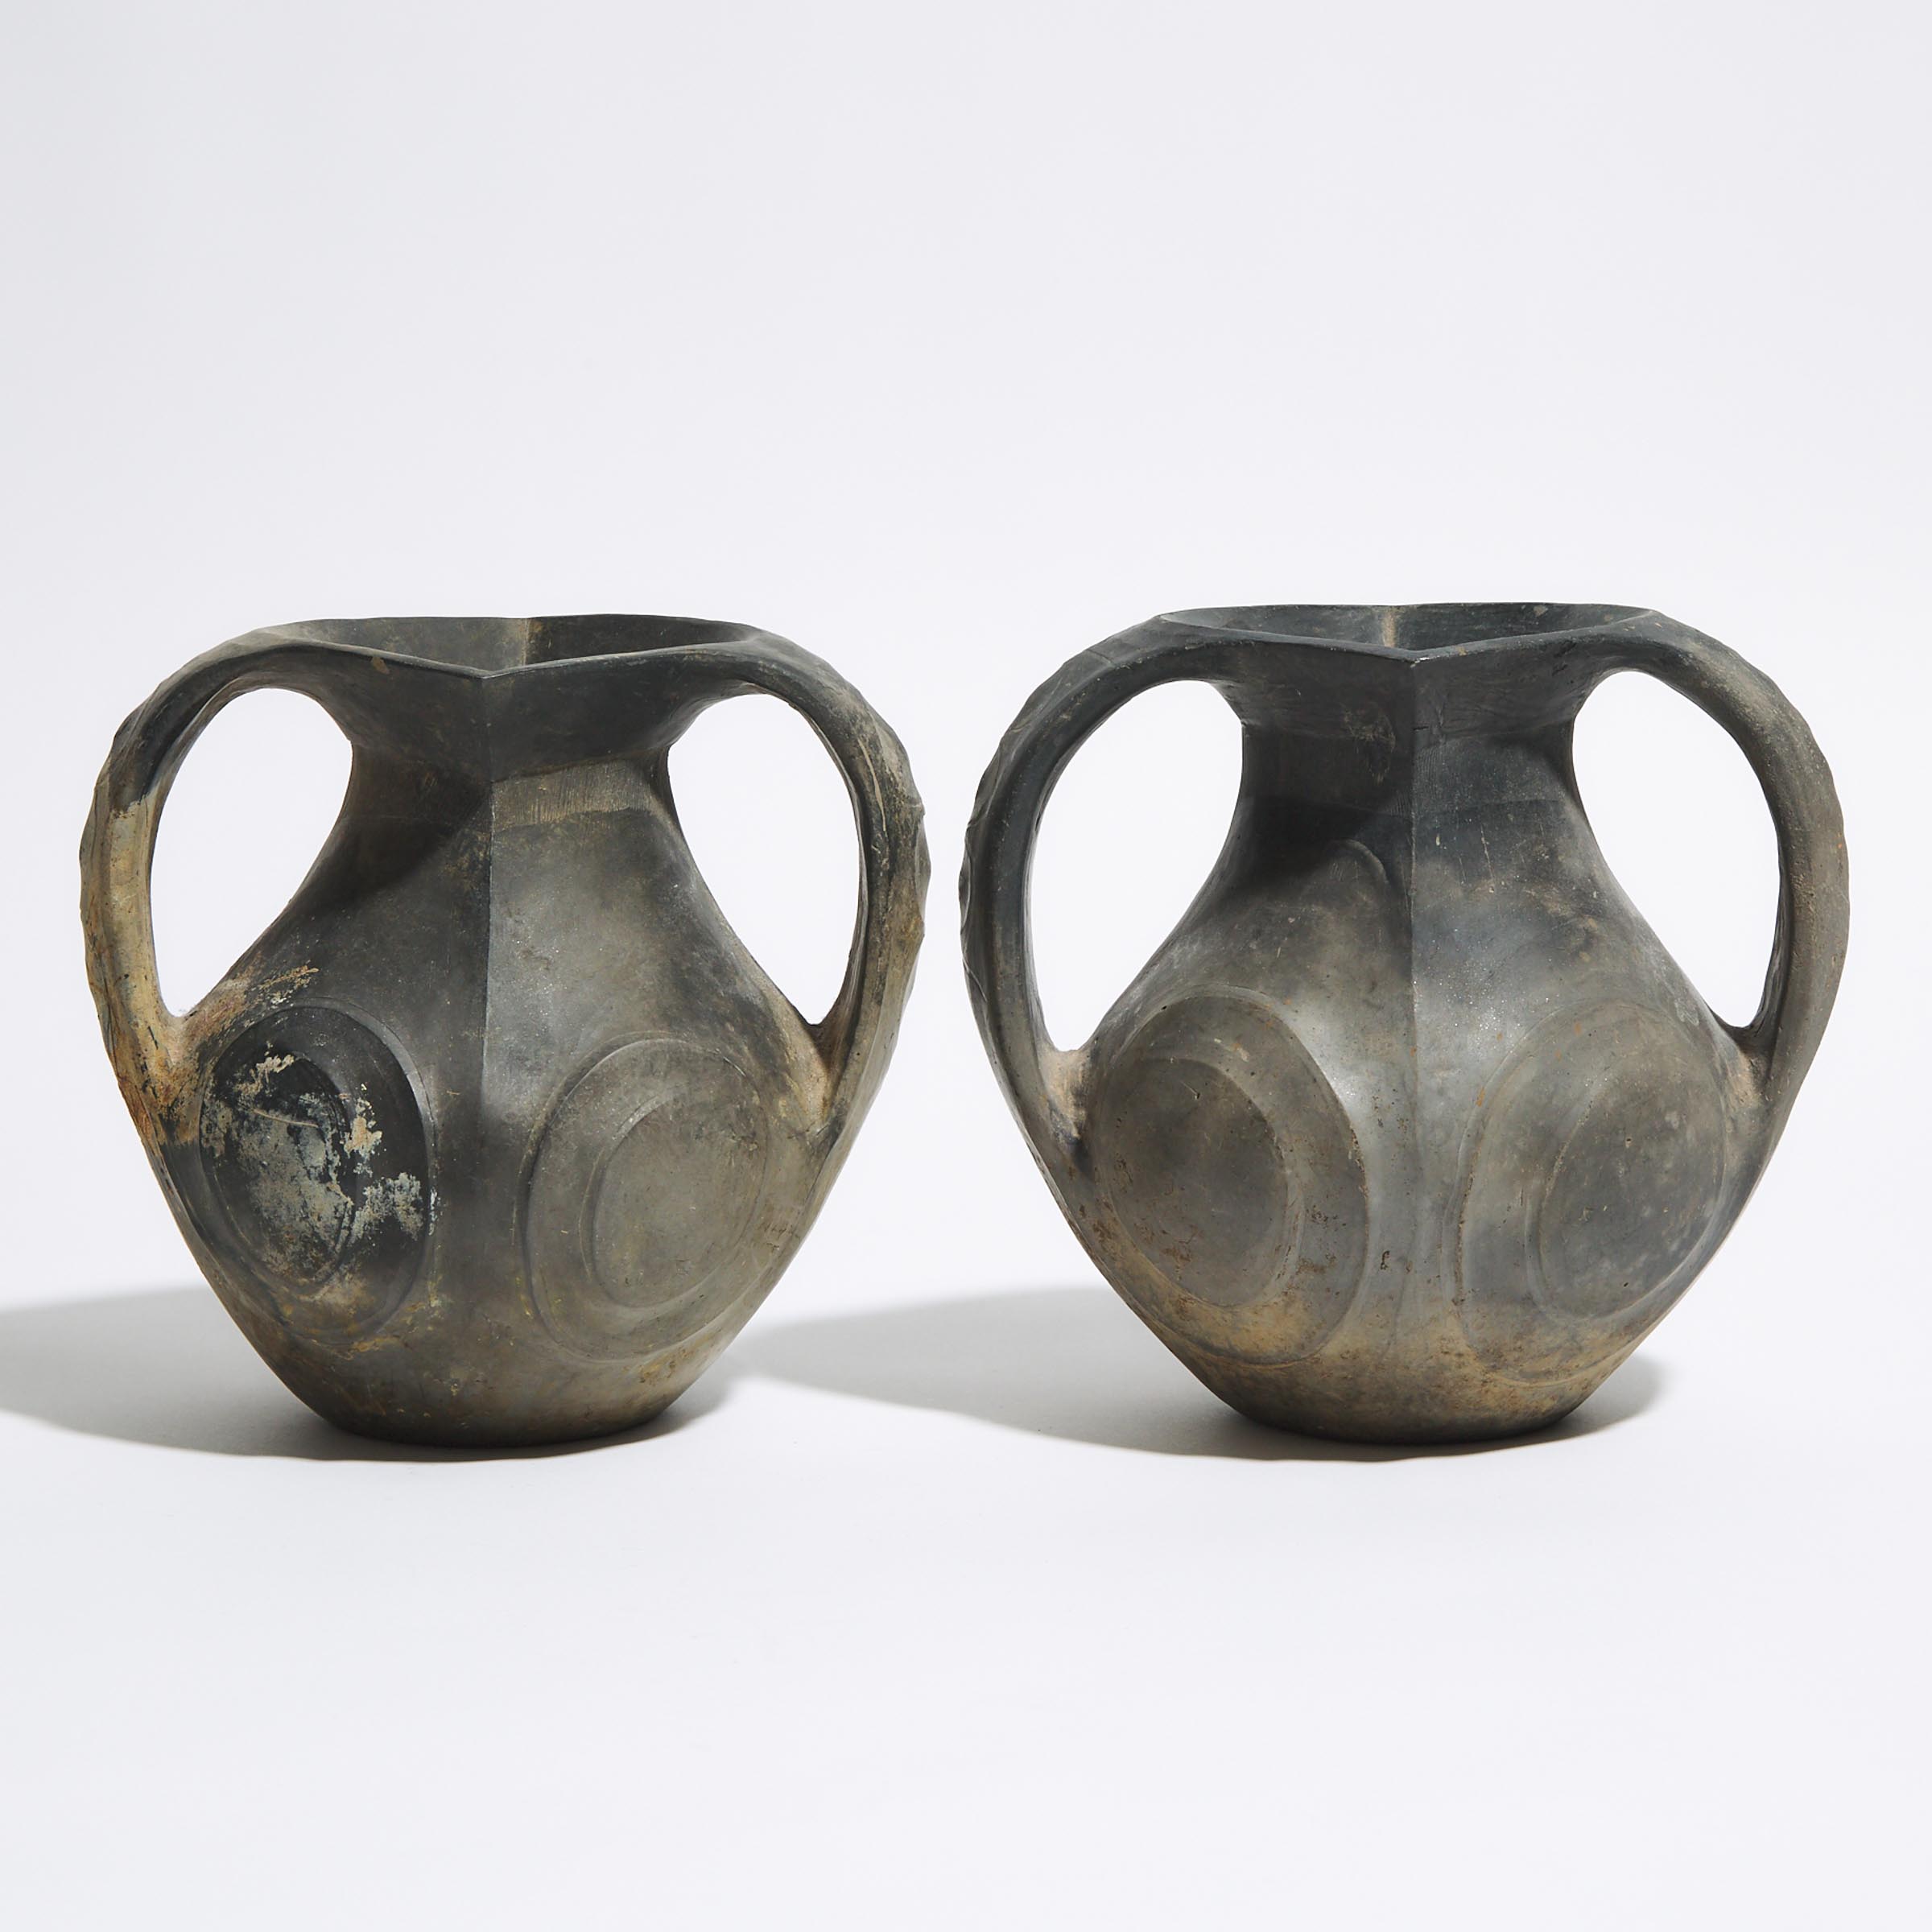 A Pair of Small Black Pottery Amphorae, Han Dynasty (206 BC - AD 220)